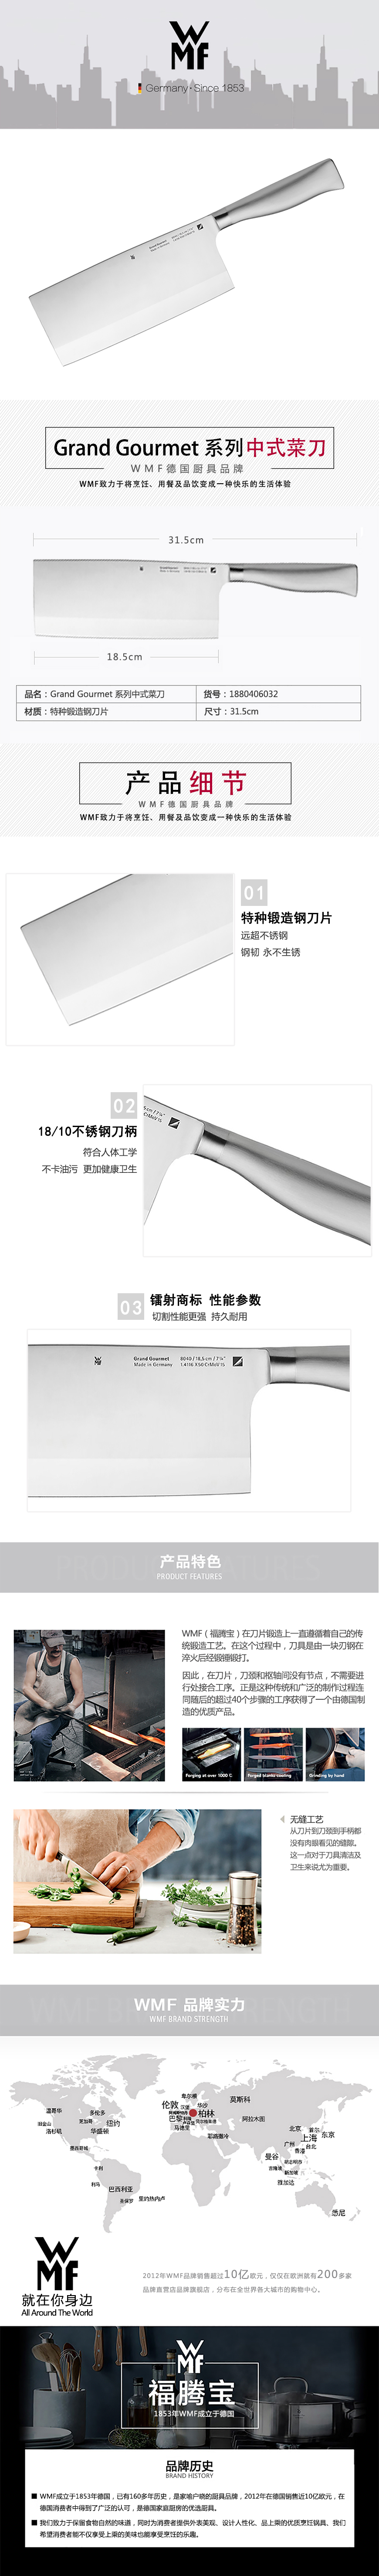 WMF Grand Gourmet 1880406032, Chinese chef's knife, 18.5 cm